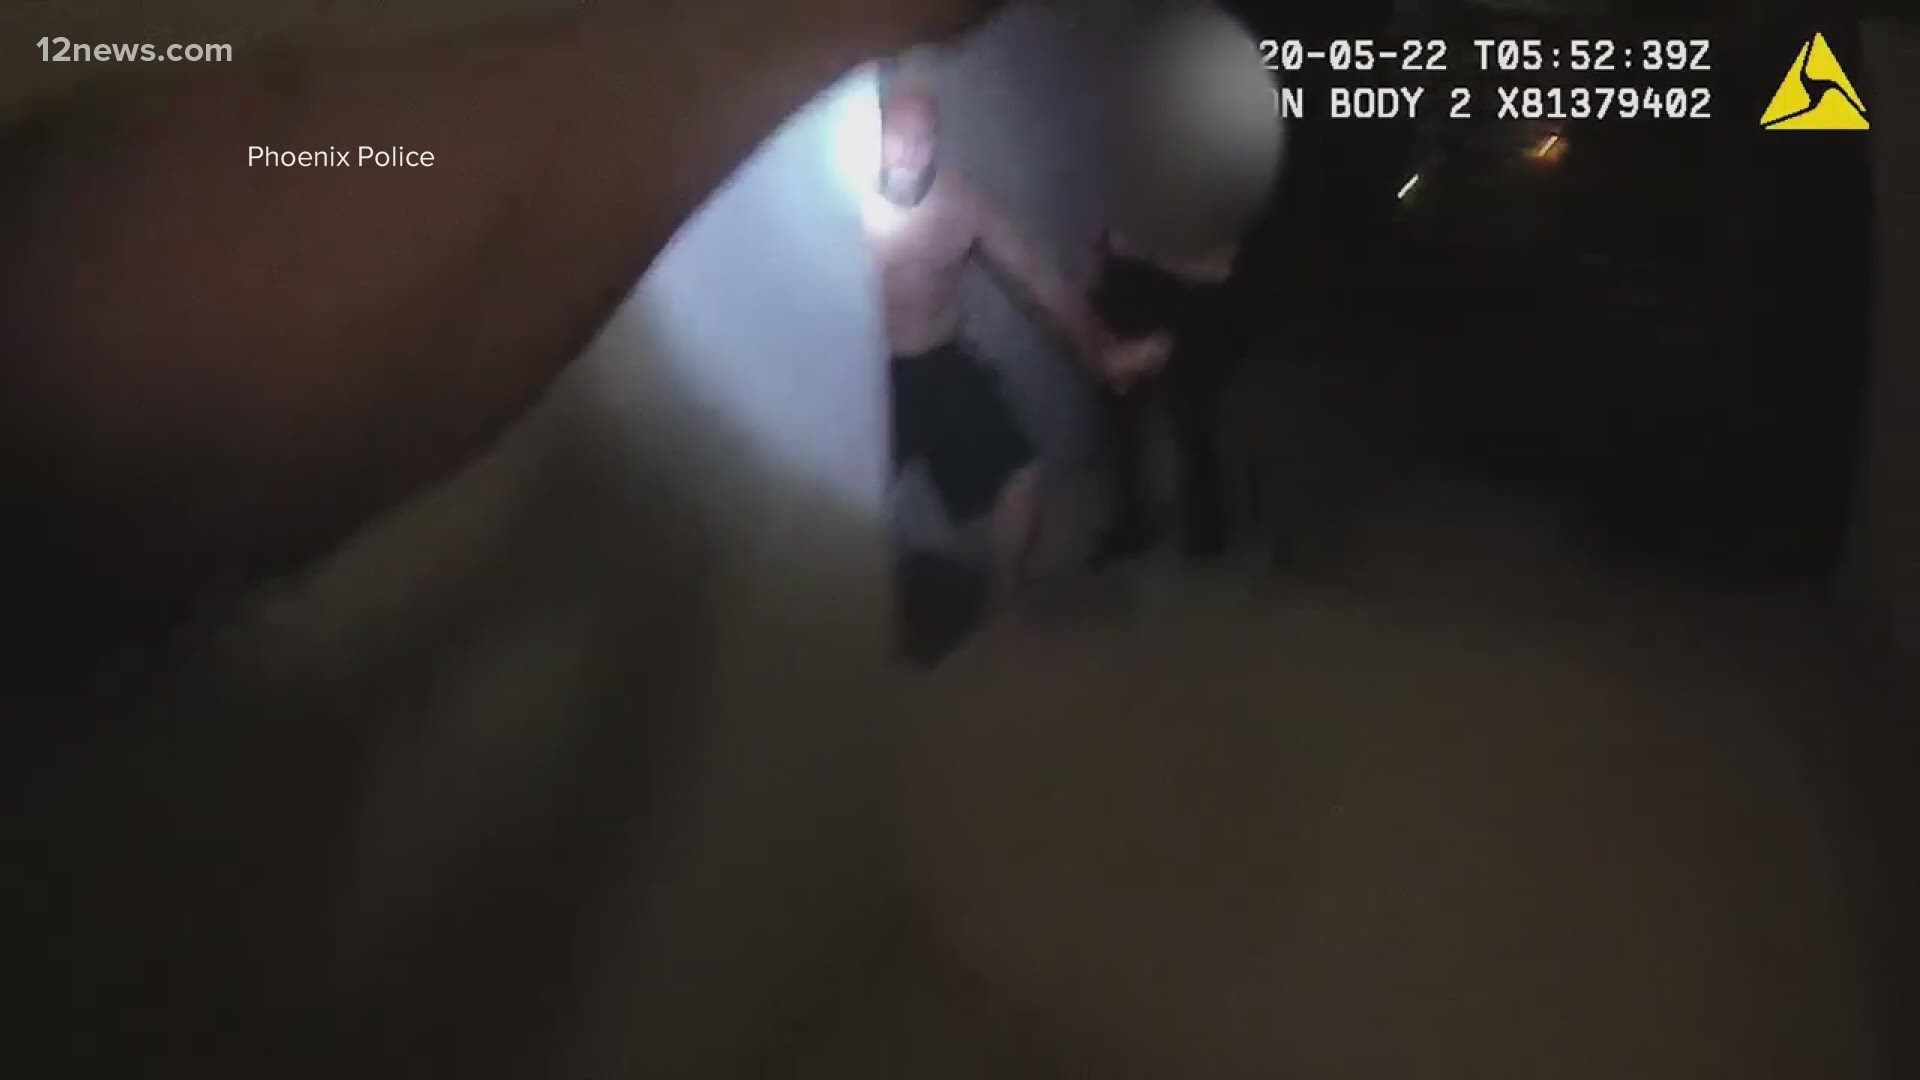 Phoenix police released edited body camera video showing the night Ryan Whitaker was shot and killed. Police say they were responding to a domestic violence call.